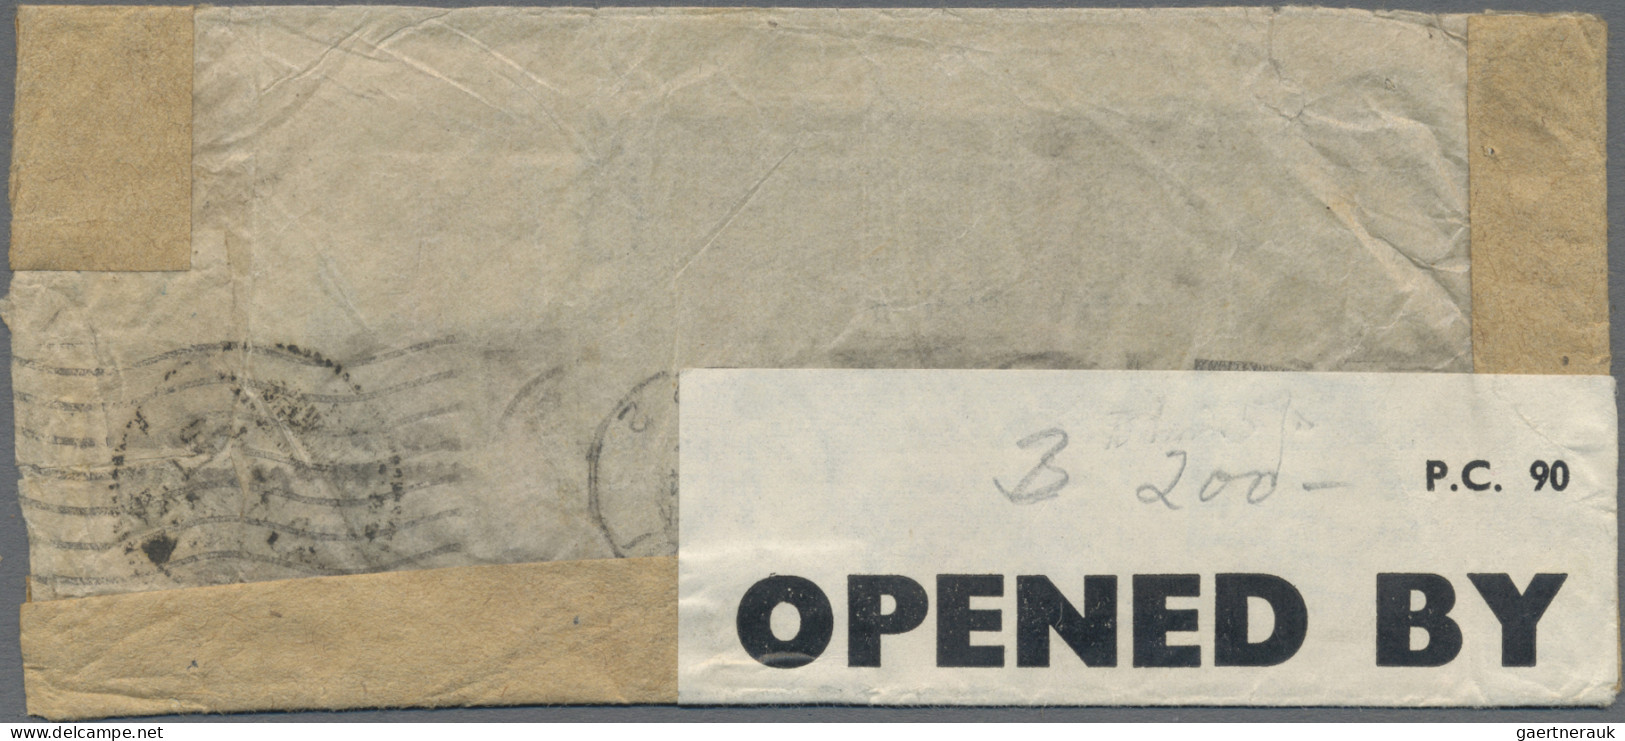 China: 1942/45, Airmail Cover Addressed To London, England Bearing SYS Central T - Cartas & Documentos